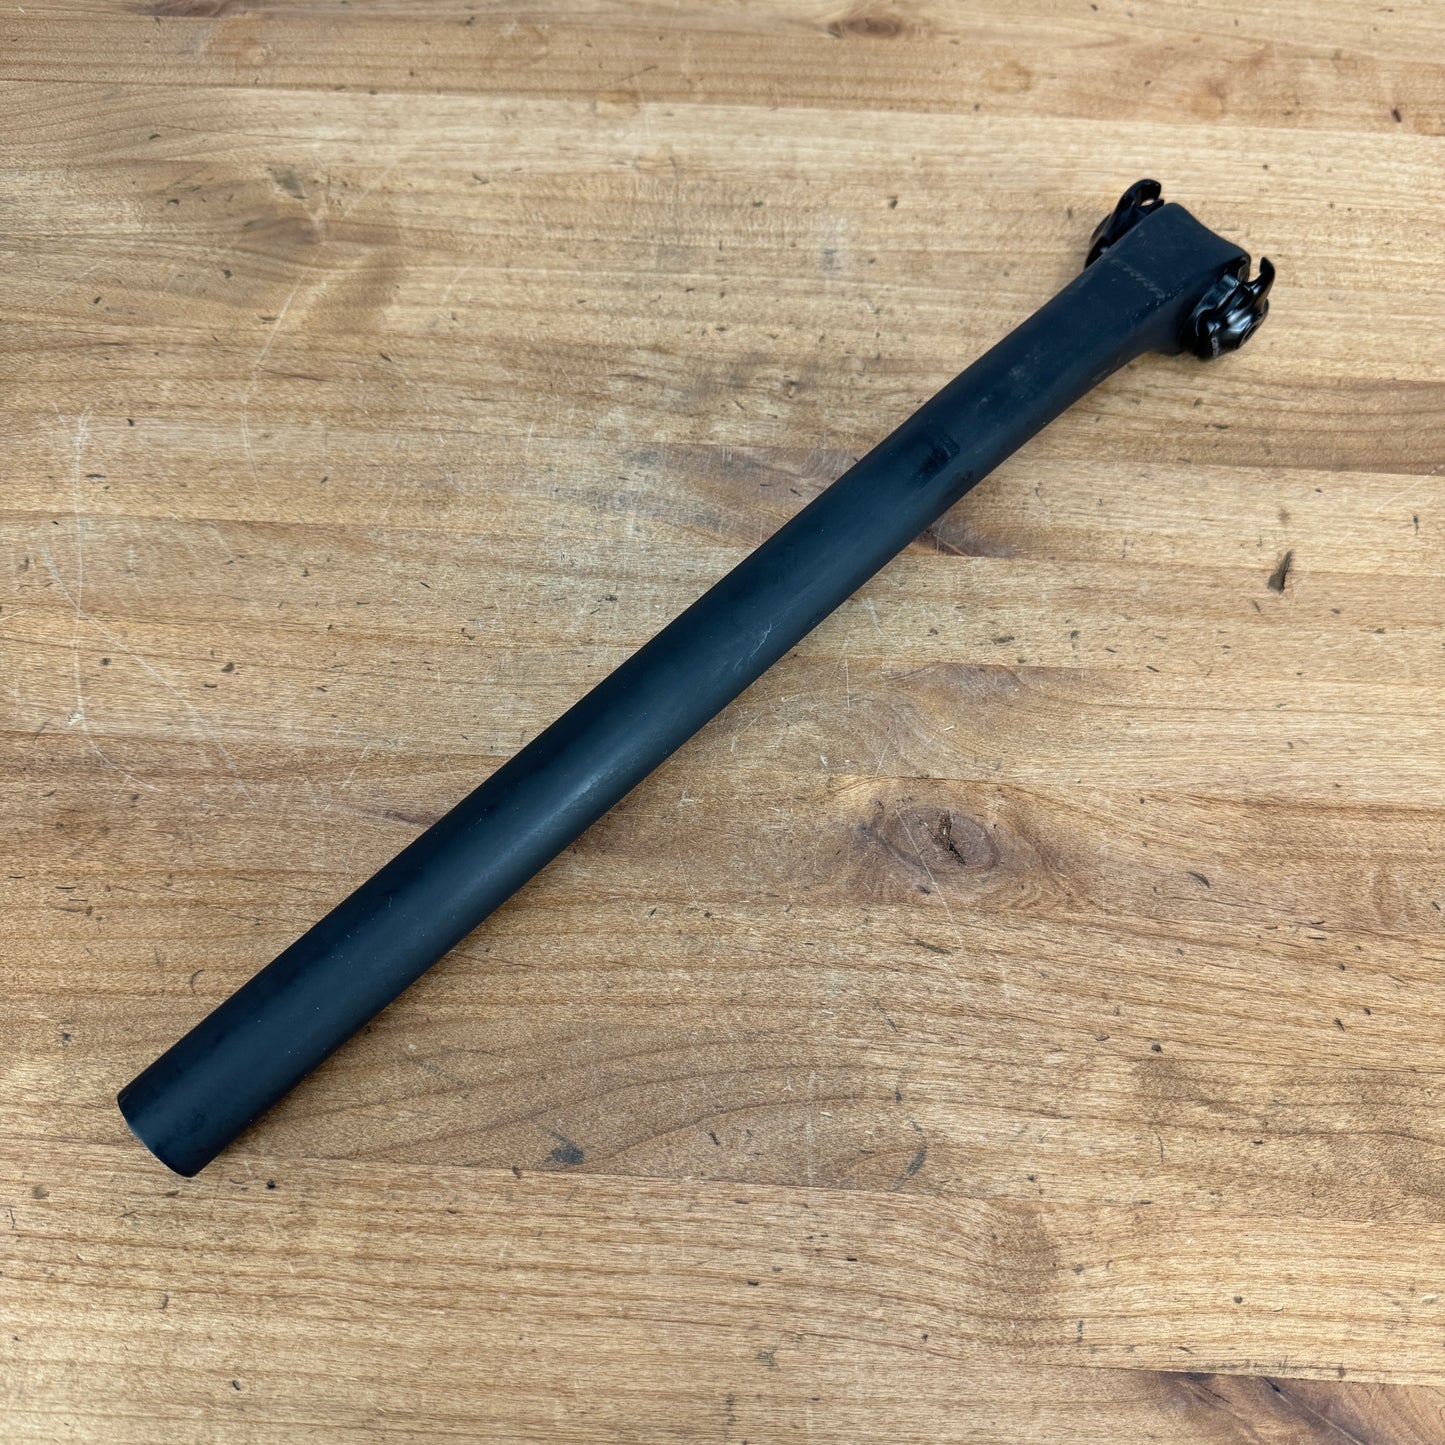 New Takeoff! Roval Terra 27.2mm x 350mm 20mm Setback Carbon Seatpost 228g